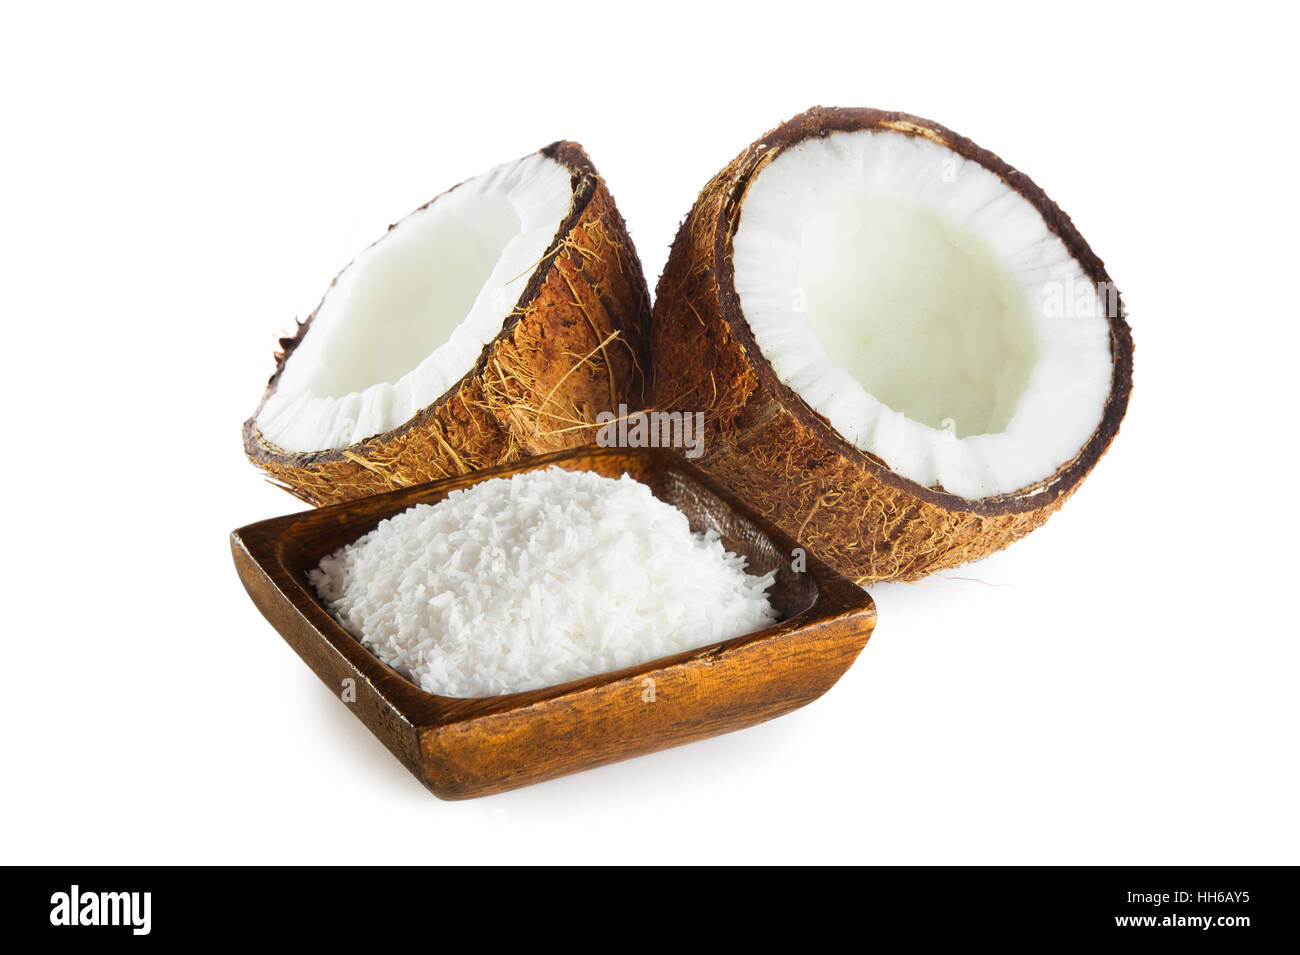 Shredded coconut in wooden bowl isolated on white background Stock Photo